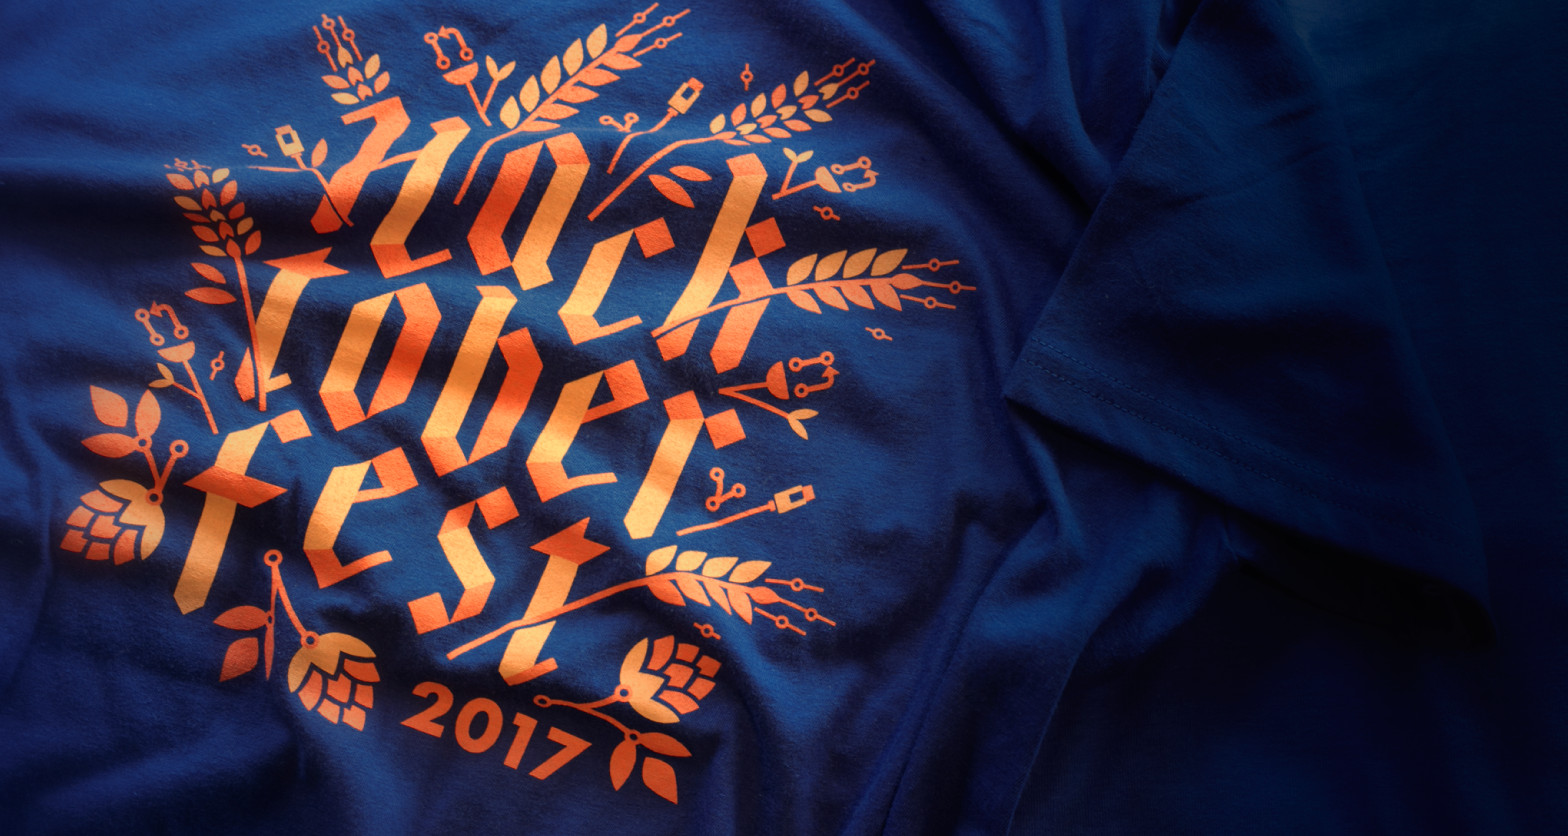 Free Hacktoberfest 2017 T-shirt for completing four pull requests